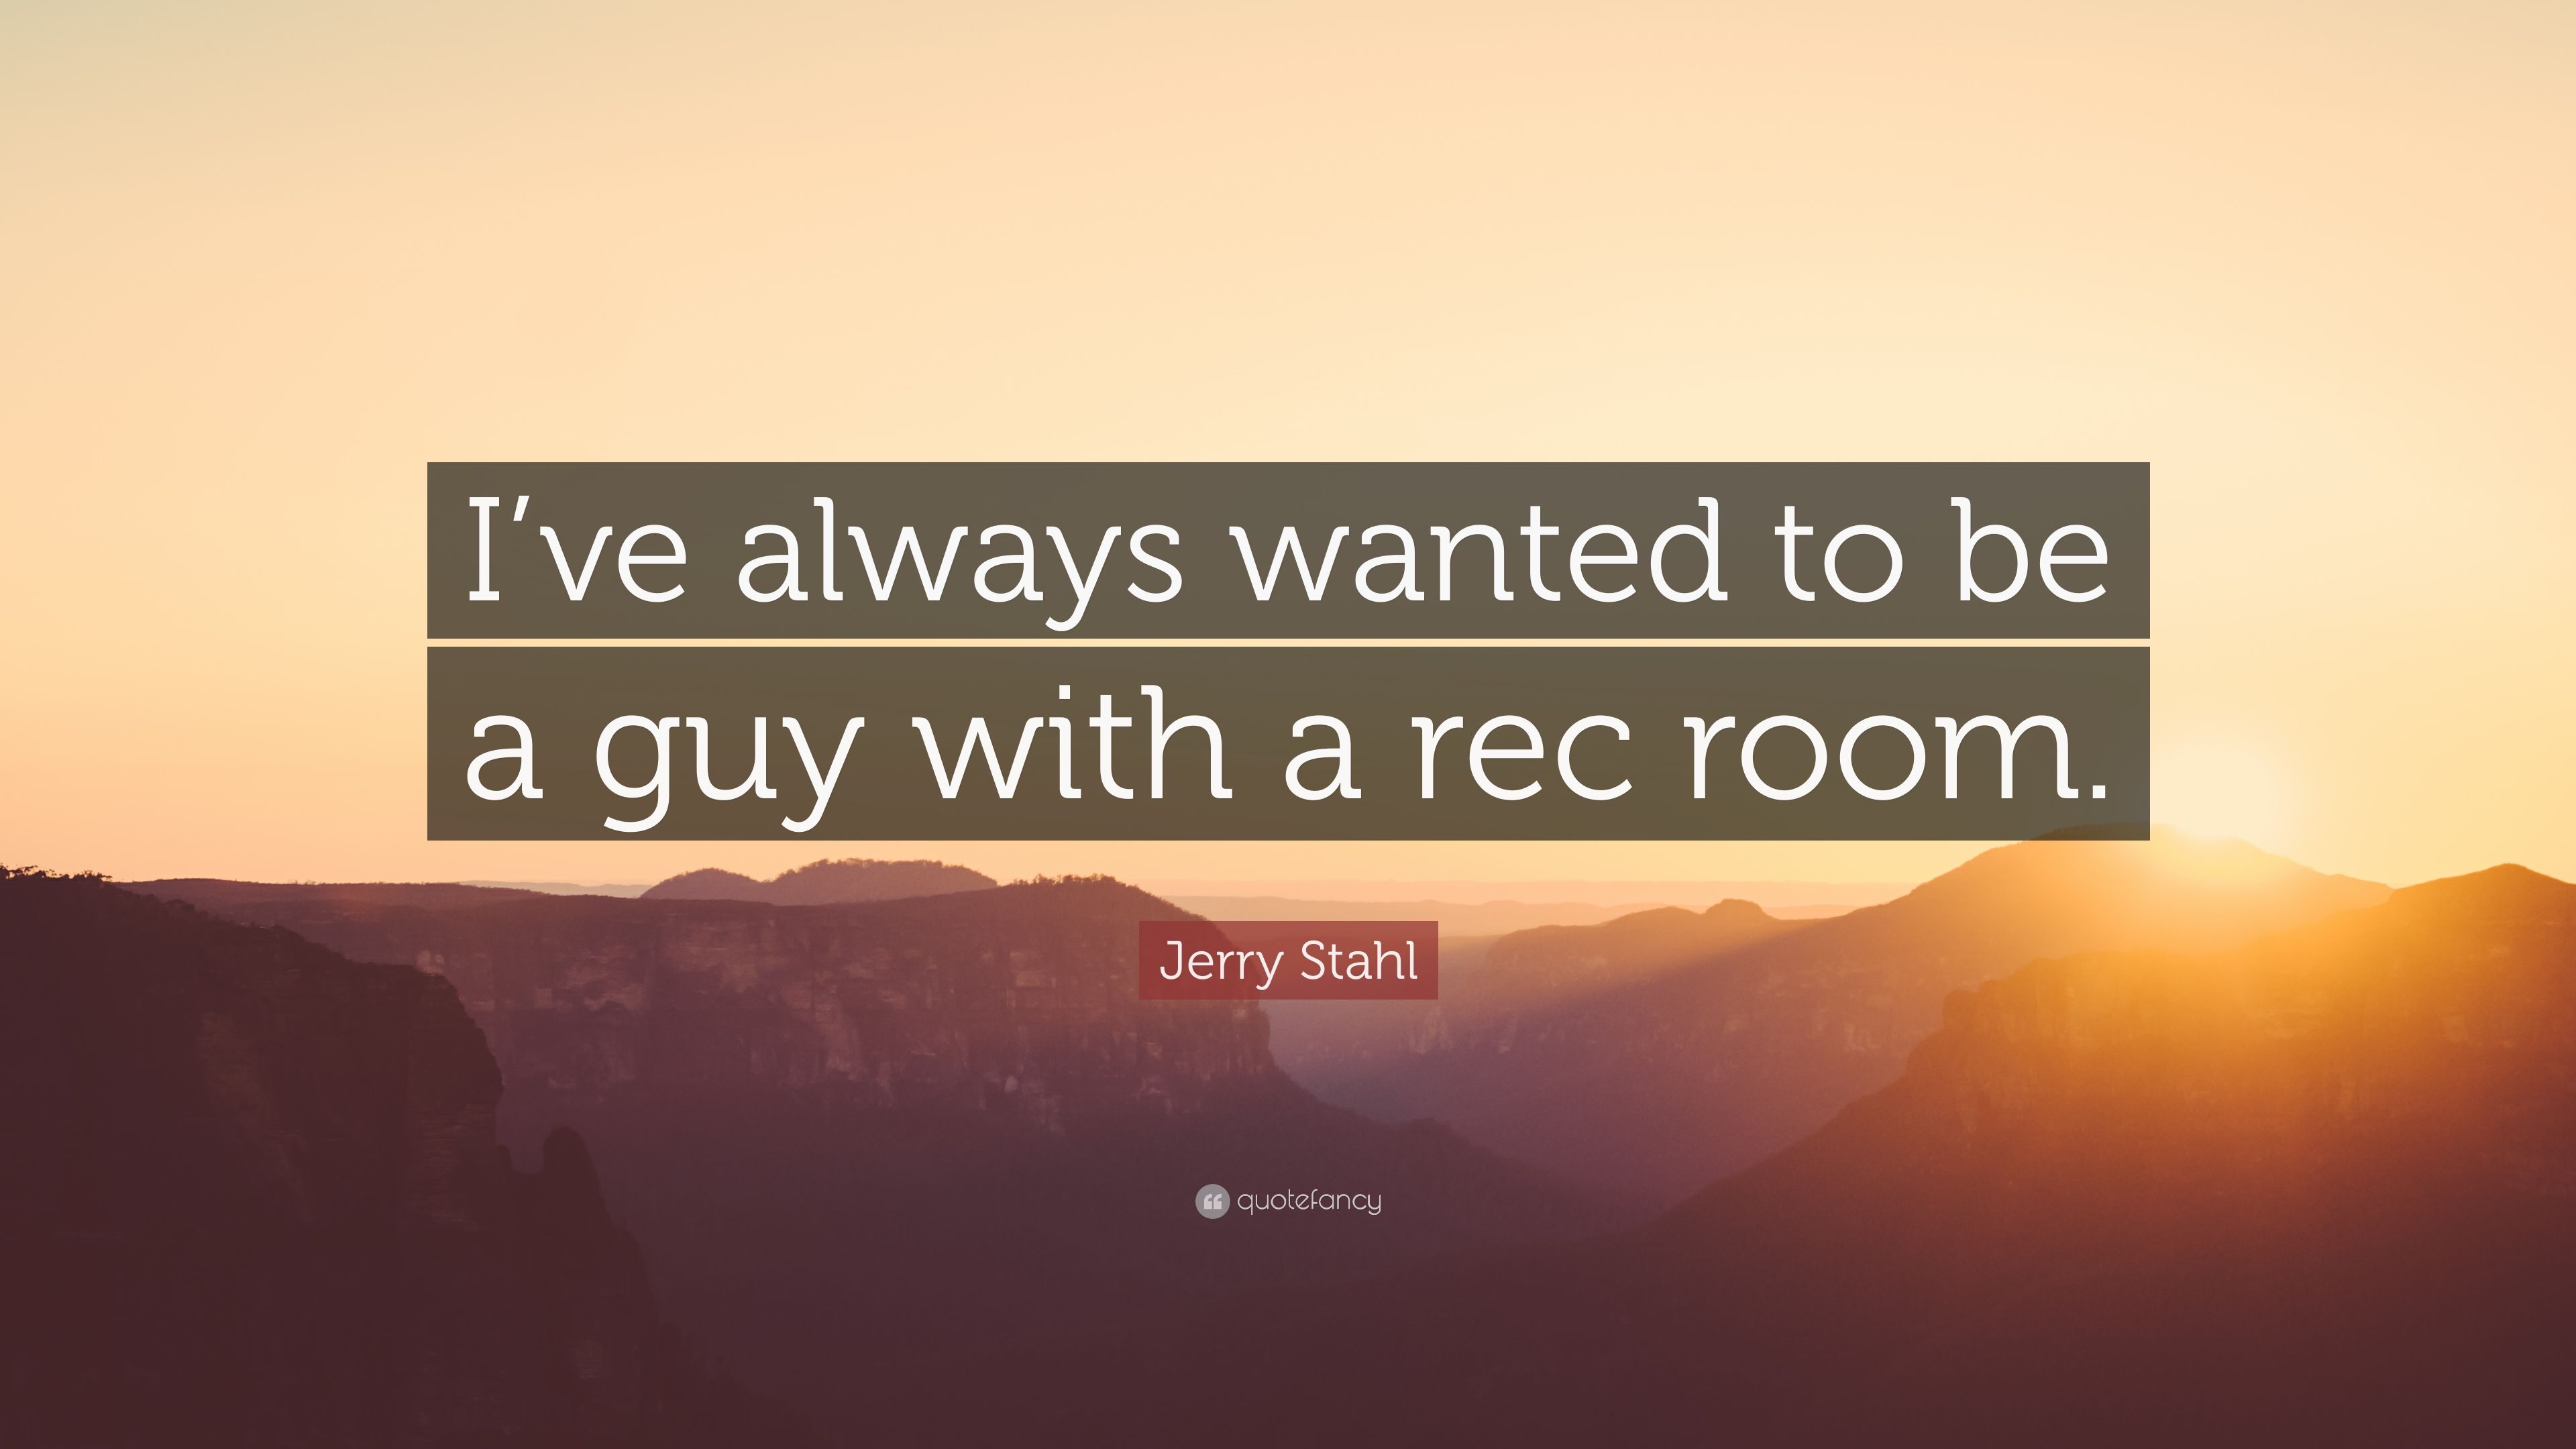 Jerry Stahl Quote: “I've always wanted to be a guy with a rec room